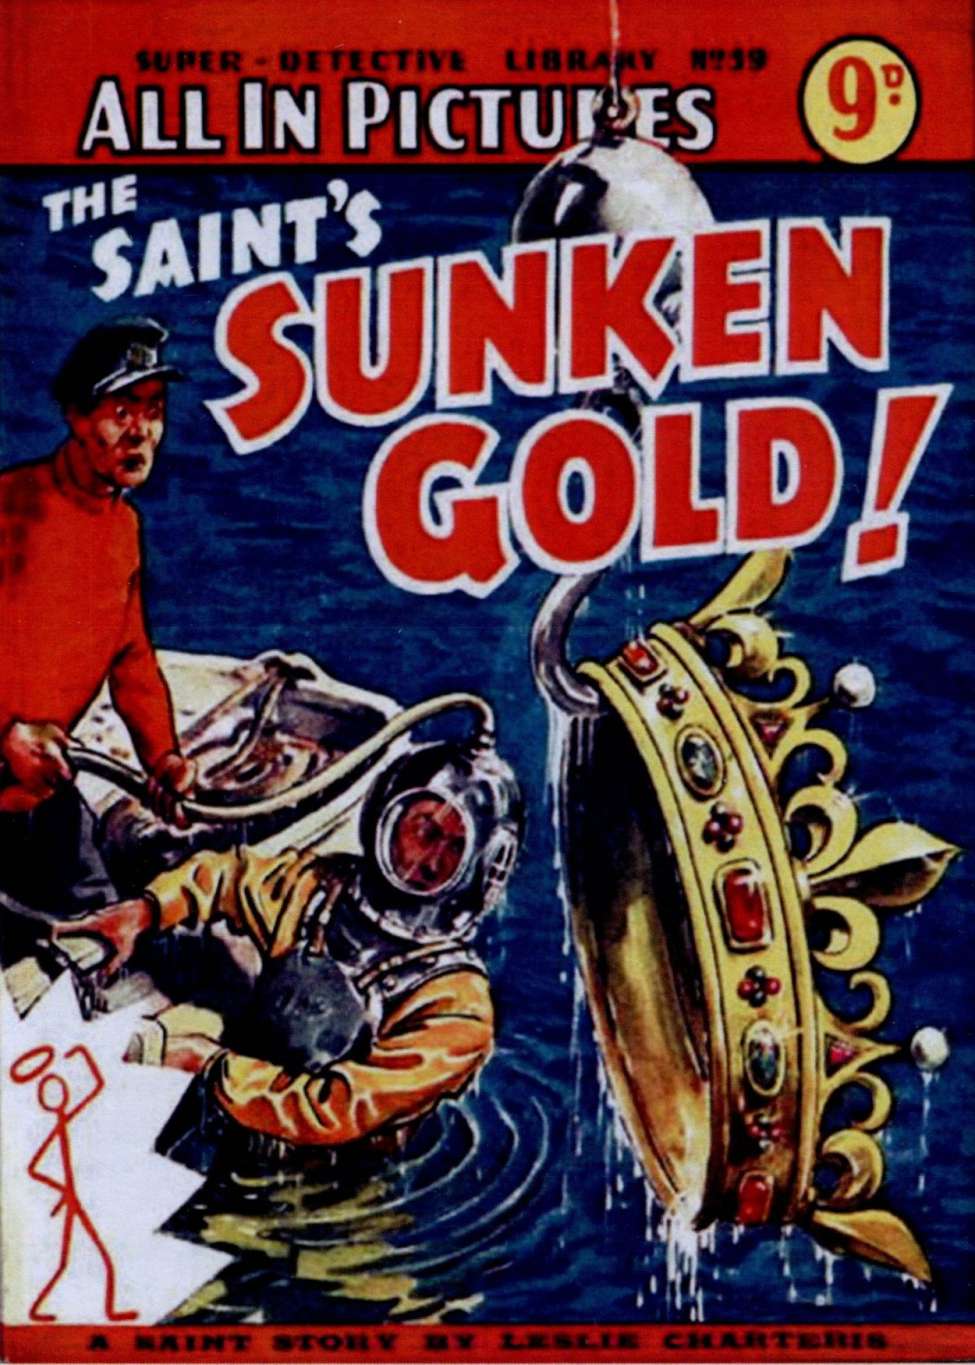 Book Cover For Super Detective Library 59 - The Saint's Sunken Gold!